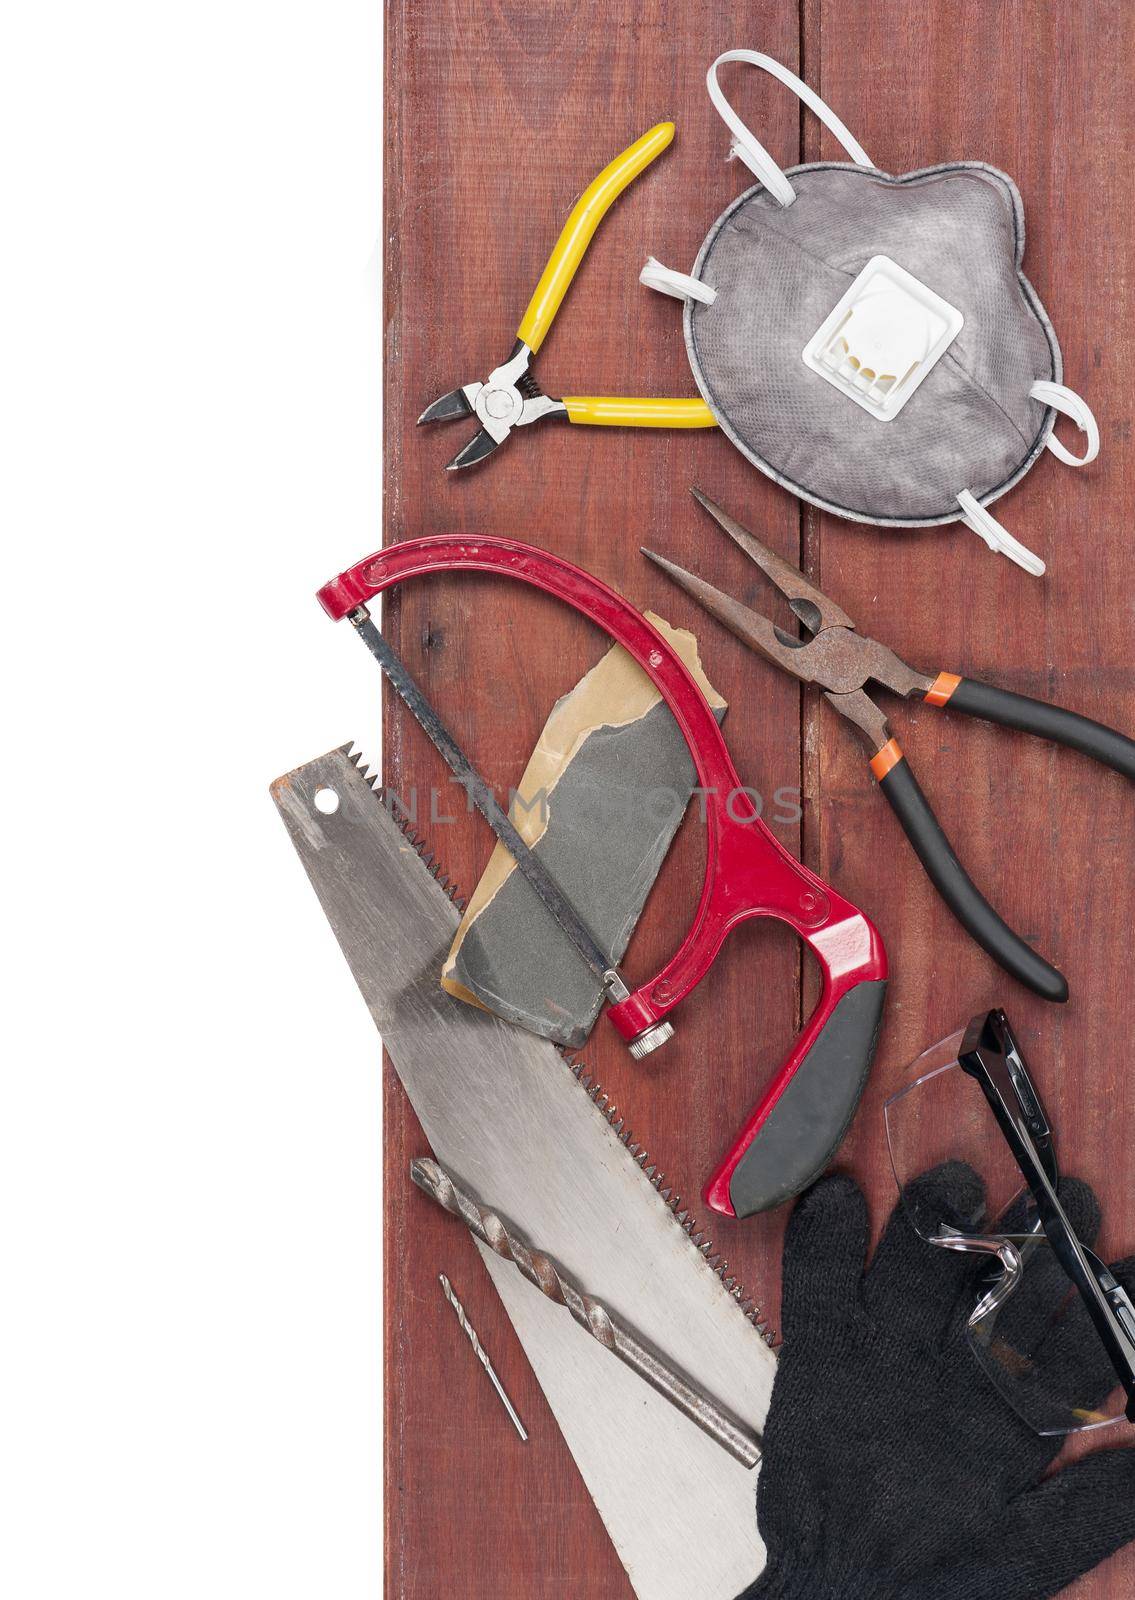 tools on wooden plank background